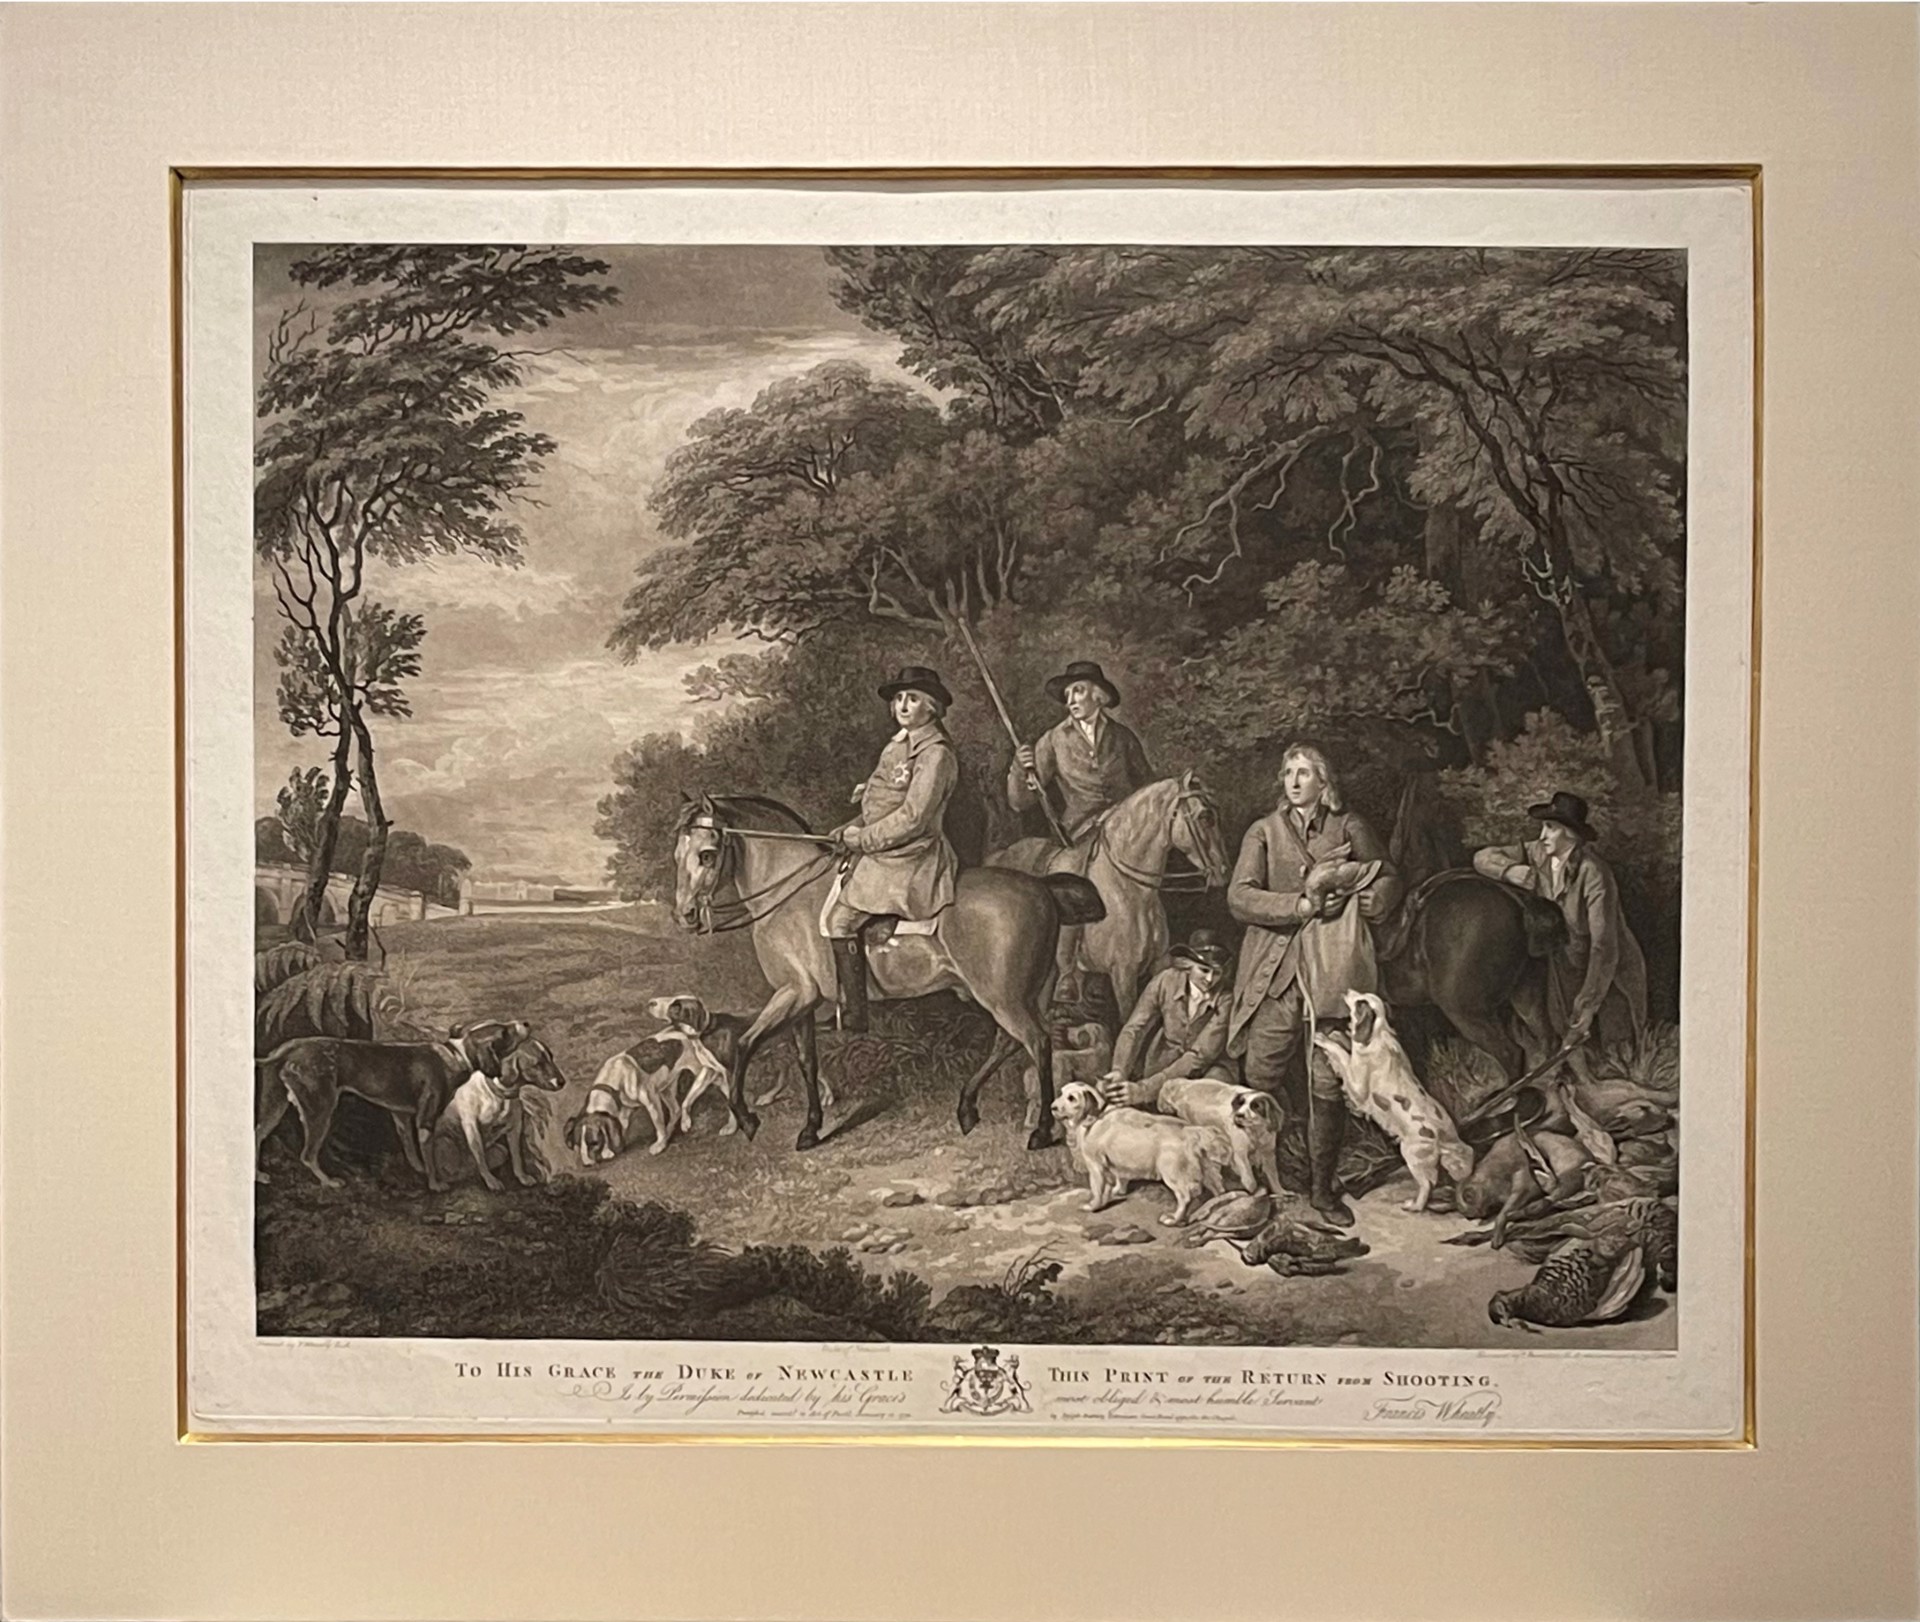 Return From Shooting, 1792 by Francis Wheatly, R.A.